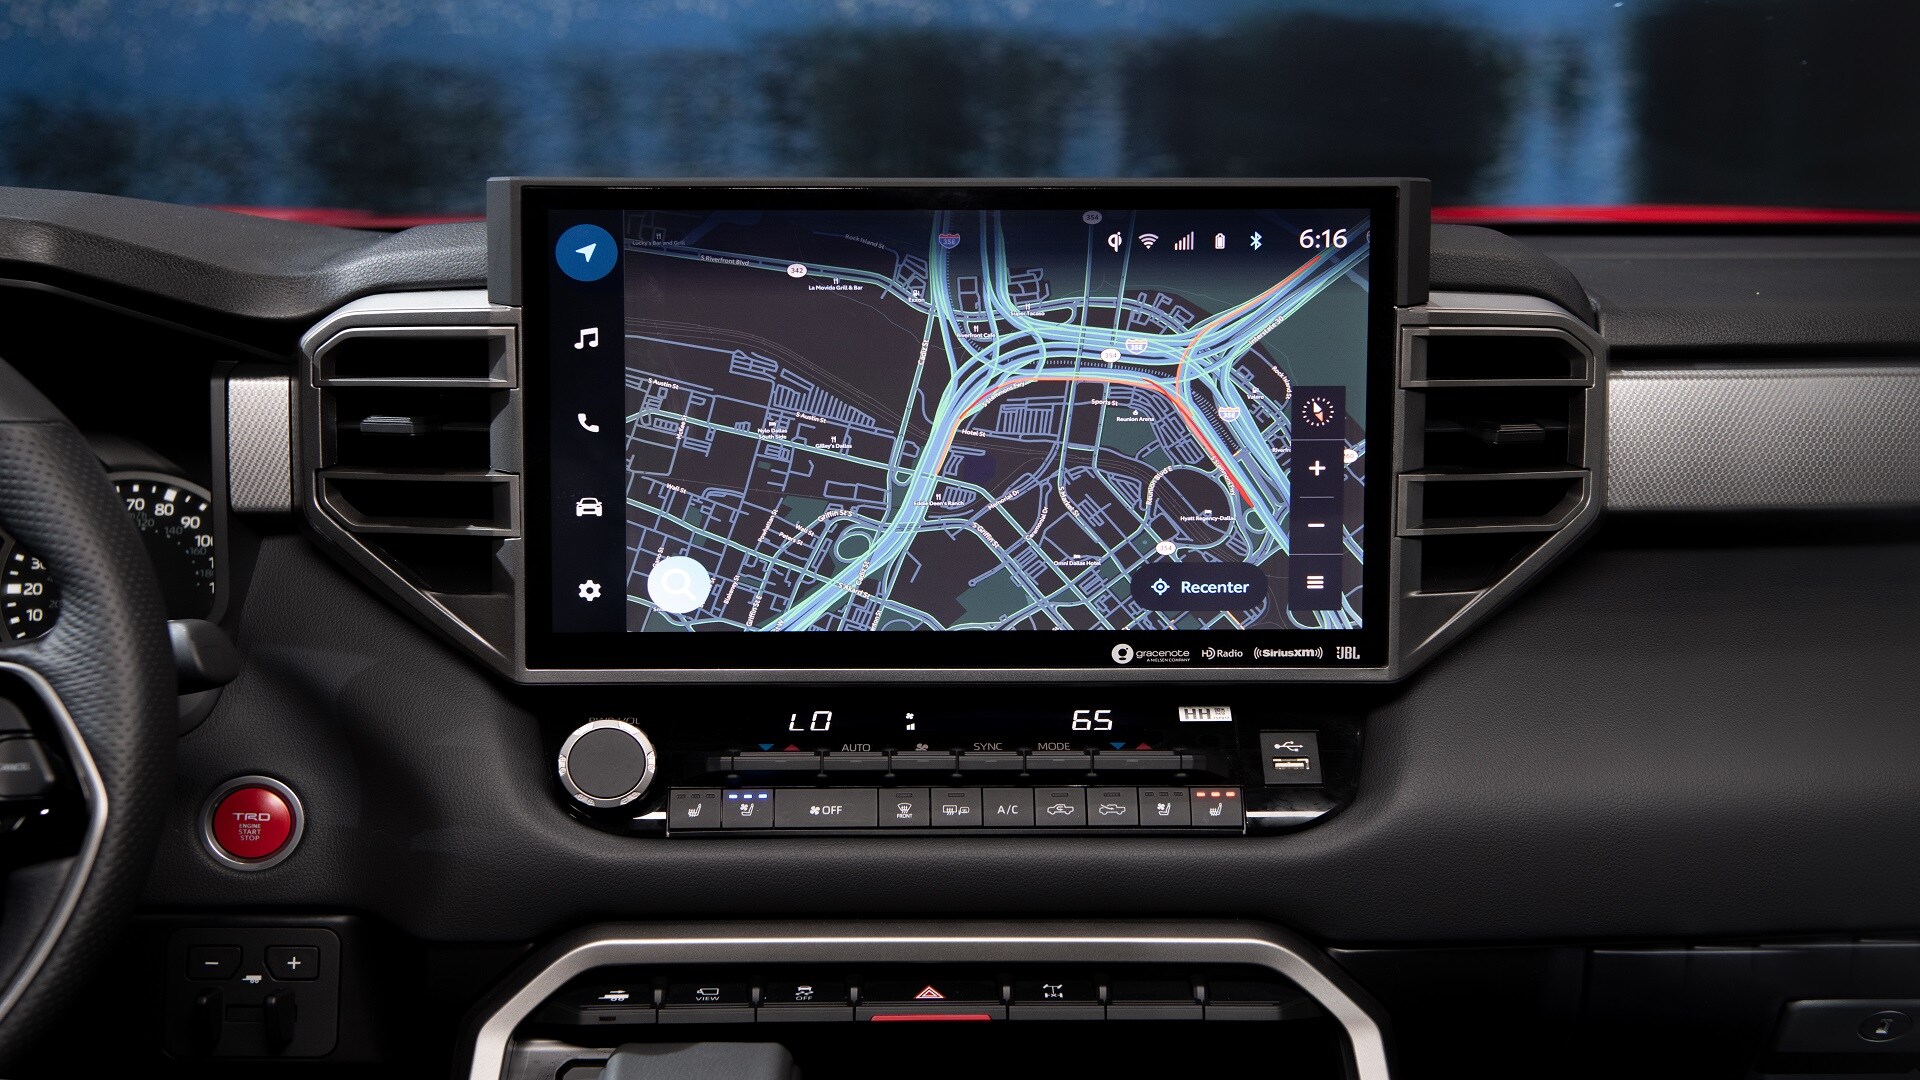 The Next Generation Toyota Multimedia System Red Deer Toyota